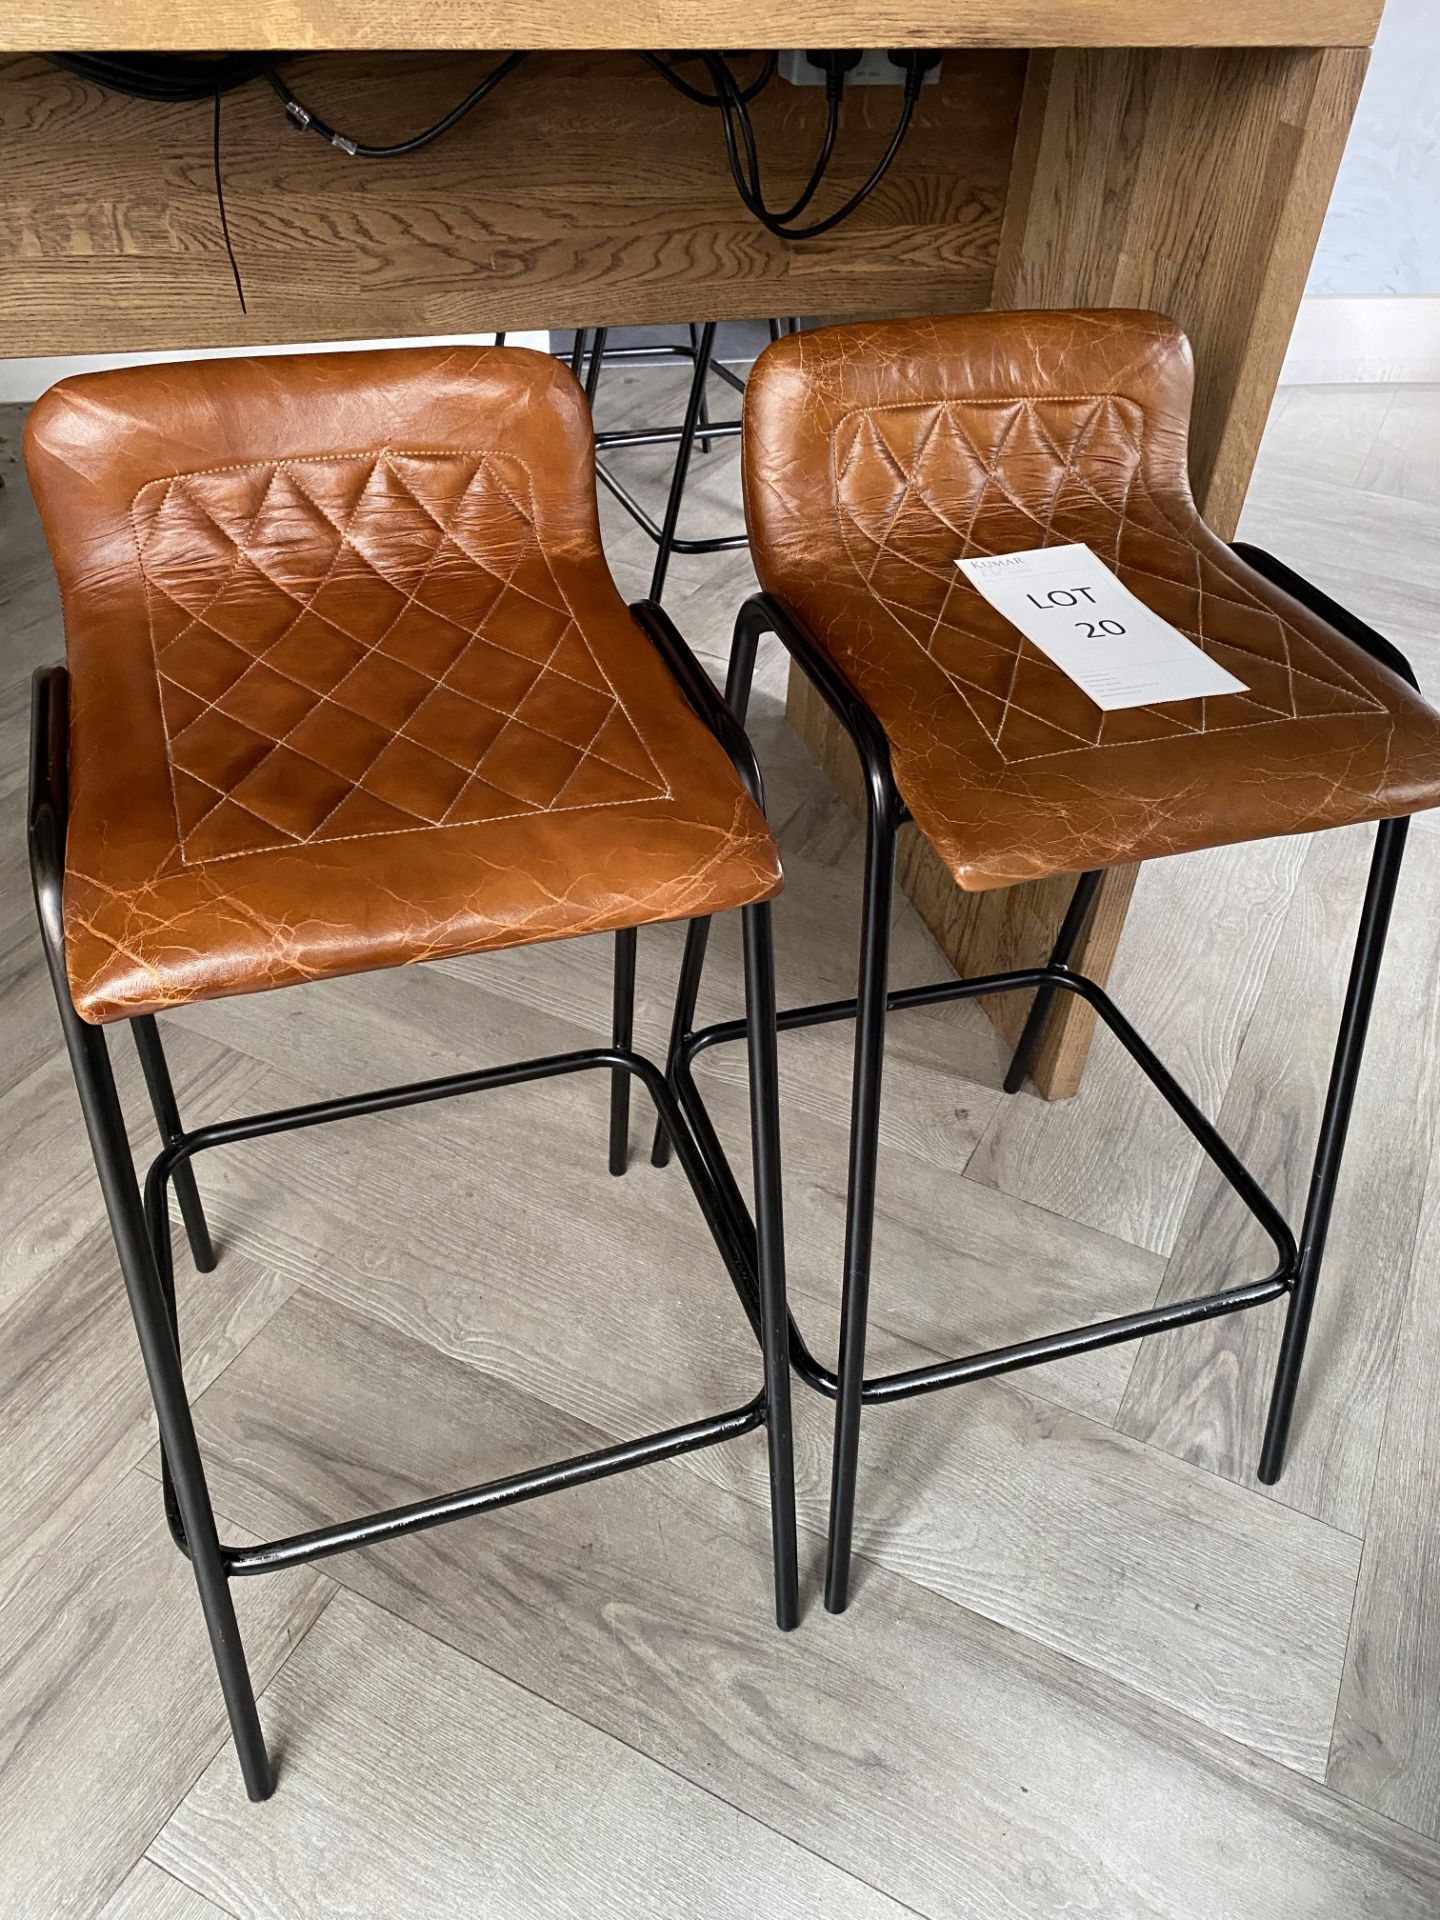 2x Leather Upholstered Bar Stools - New Cost £120 per stool - Image 2 of 2